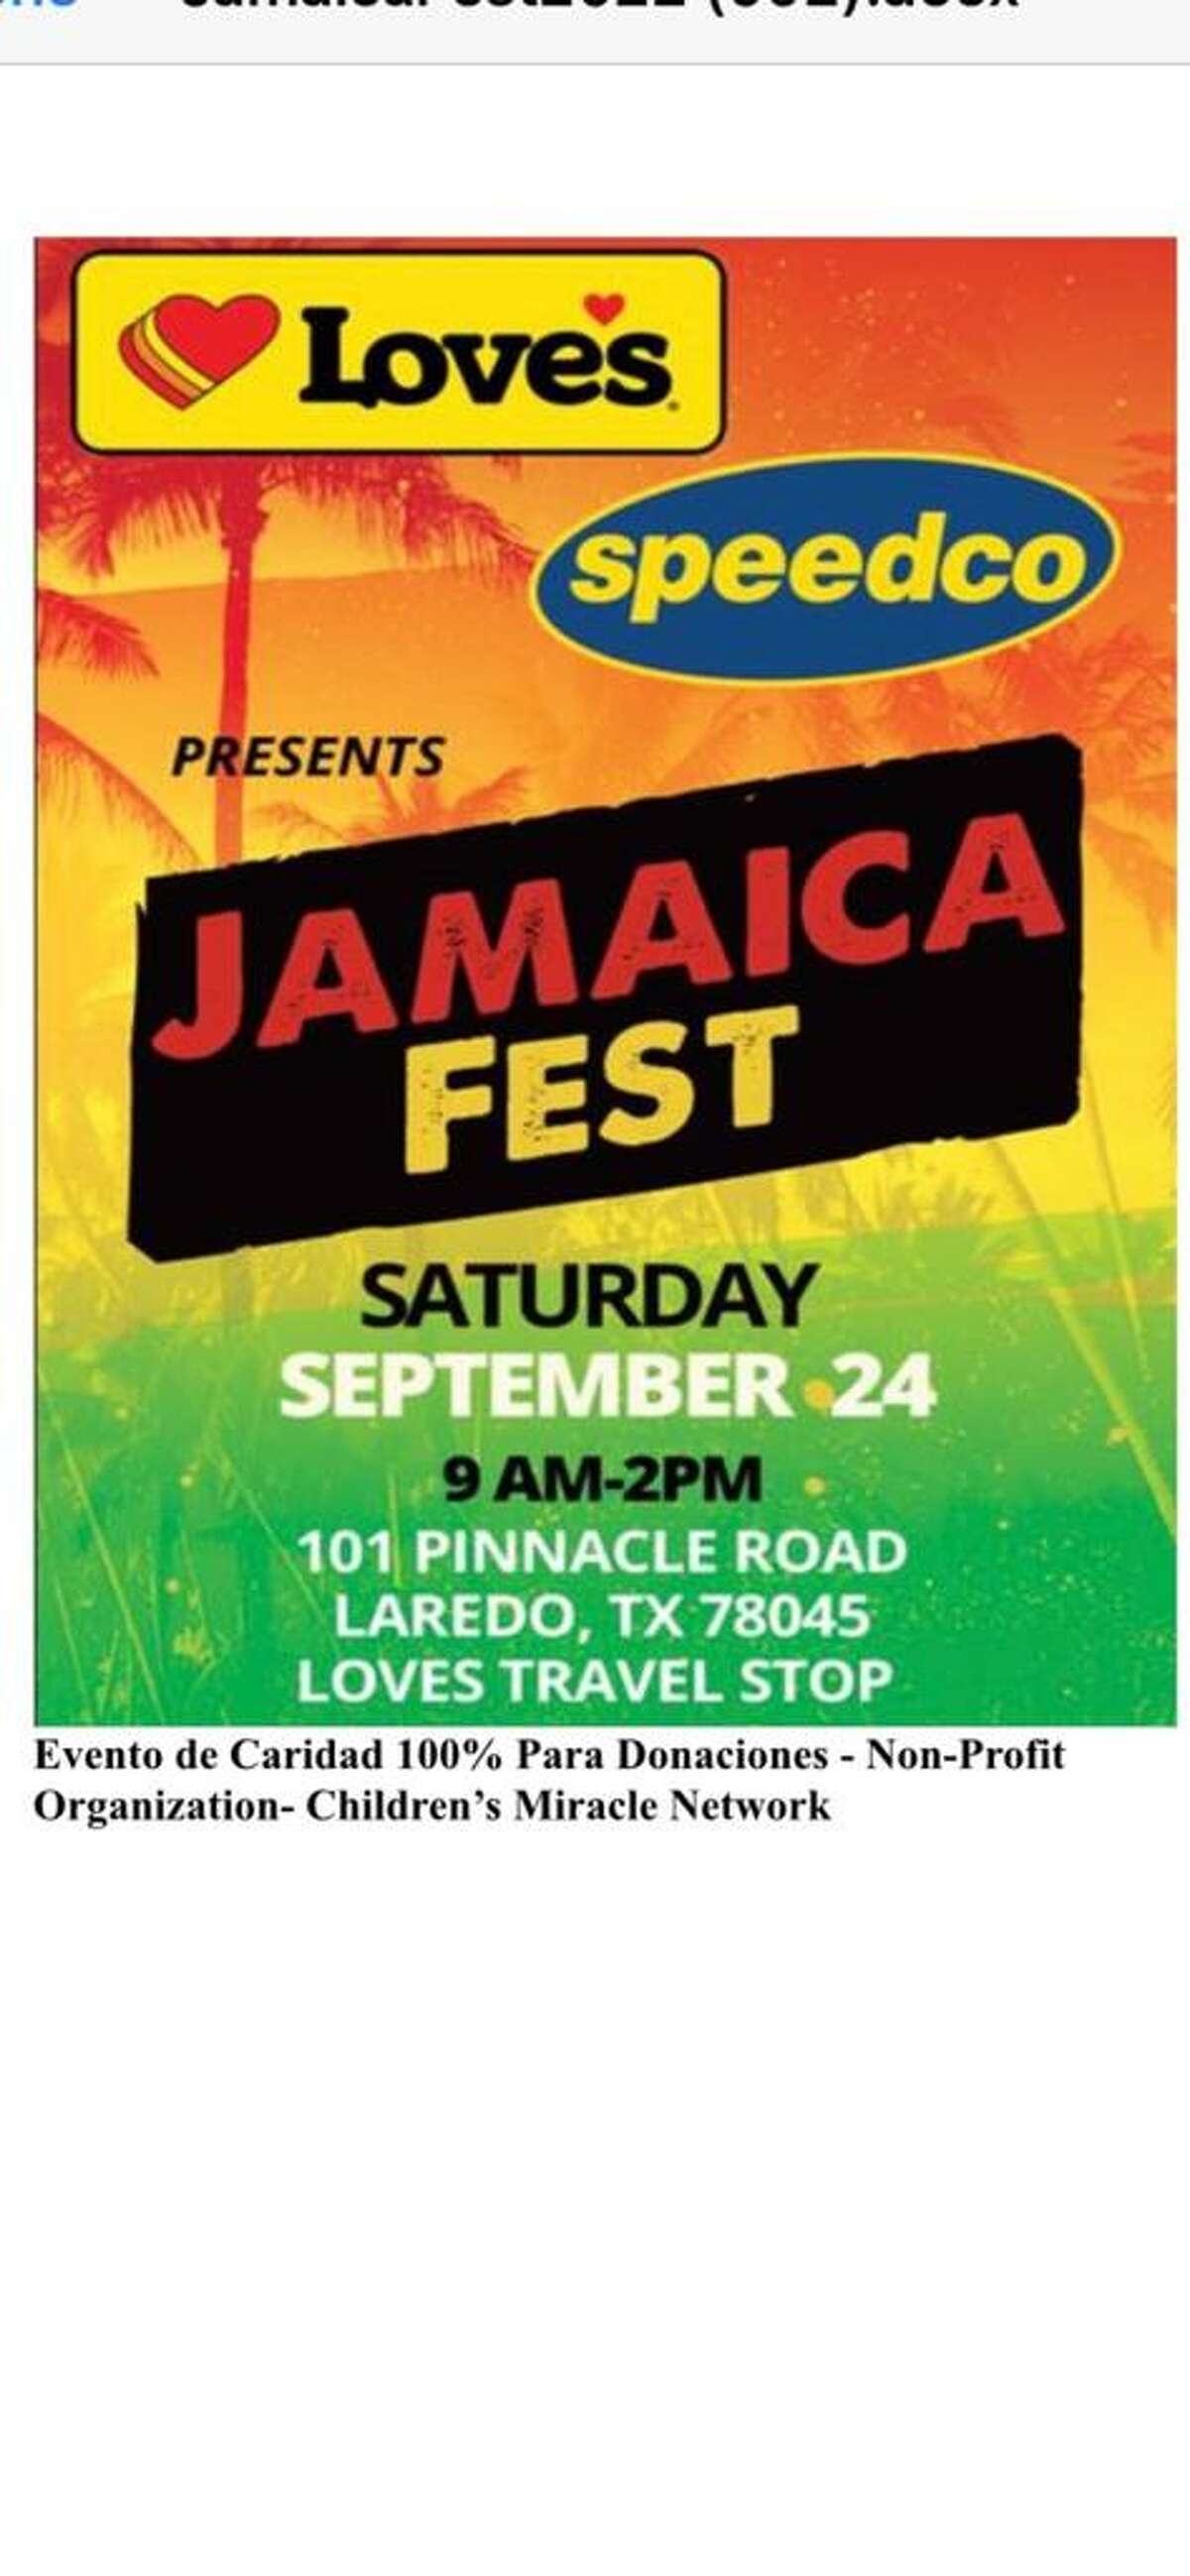 Love's Travel Stop will be holding a Jamaica Fest at 101 at Pinnacle Road to help raise fund for the Children's Miracle Network Hospitals Non-Profit Organization. Fall Family Pictures with be taken at the place. The campaign wraps up on September 30th with a raffle with several prizes.  